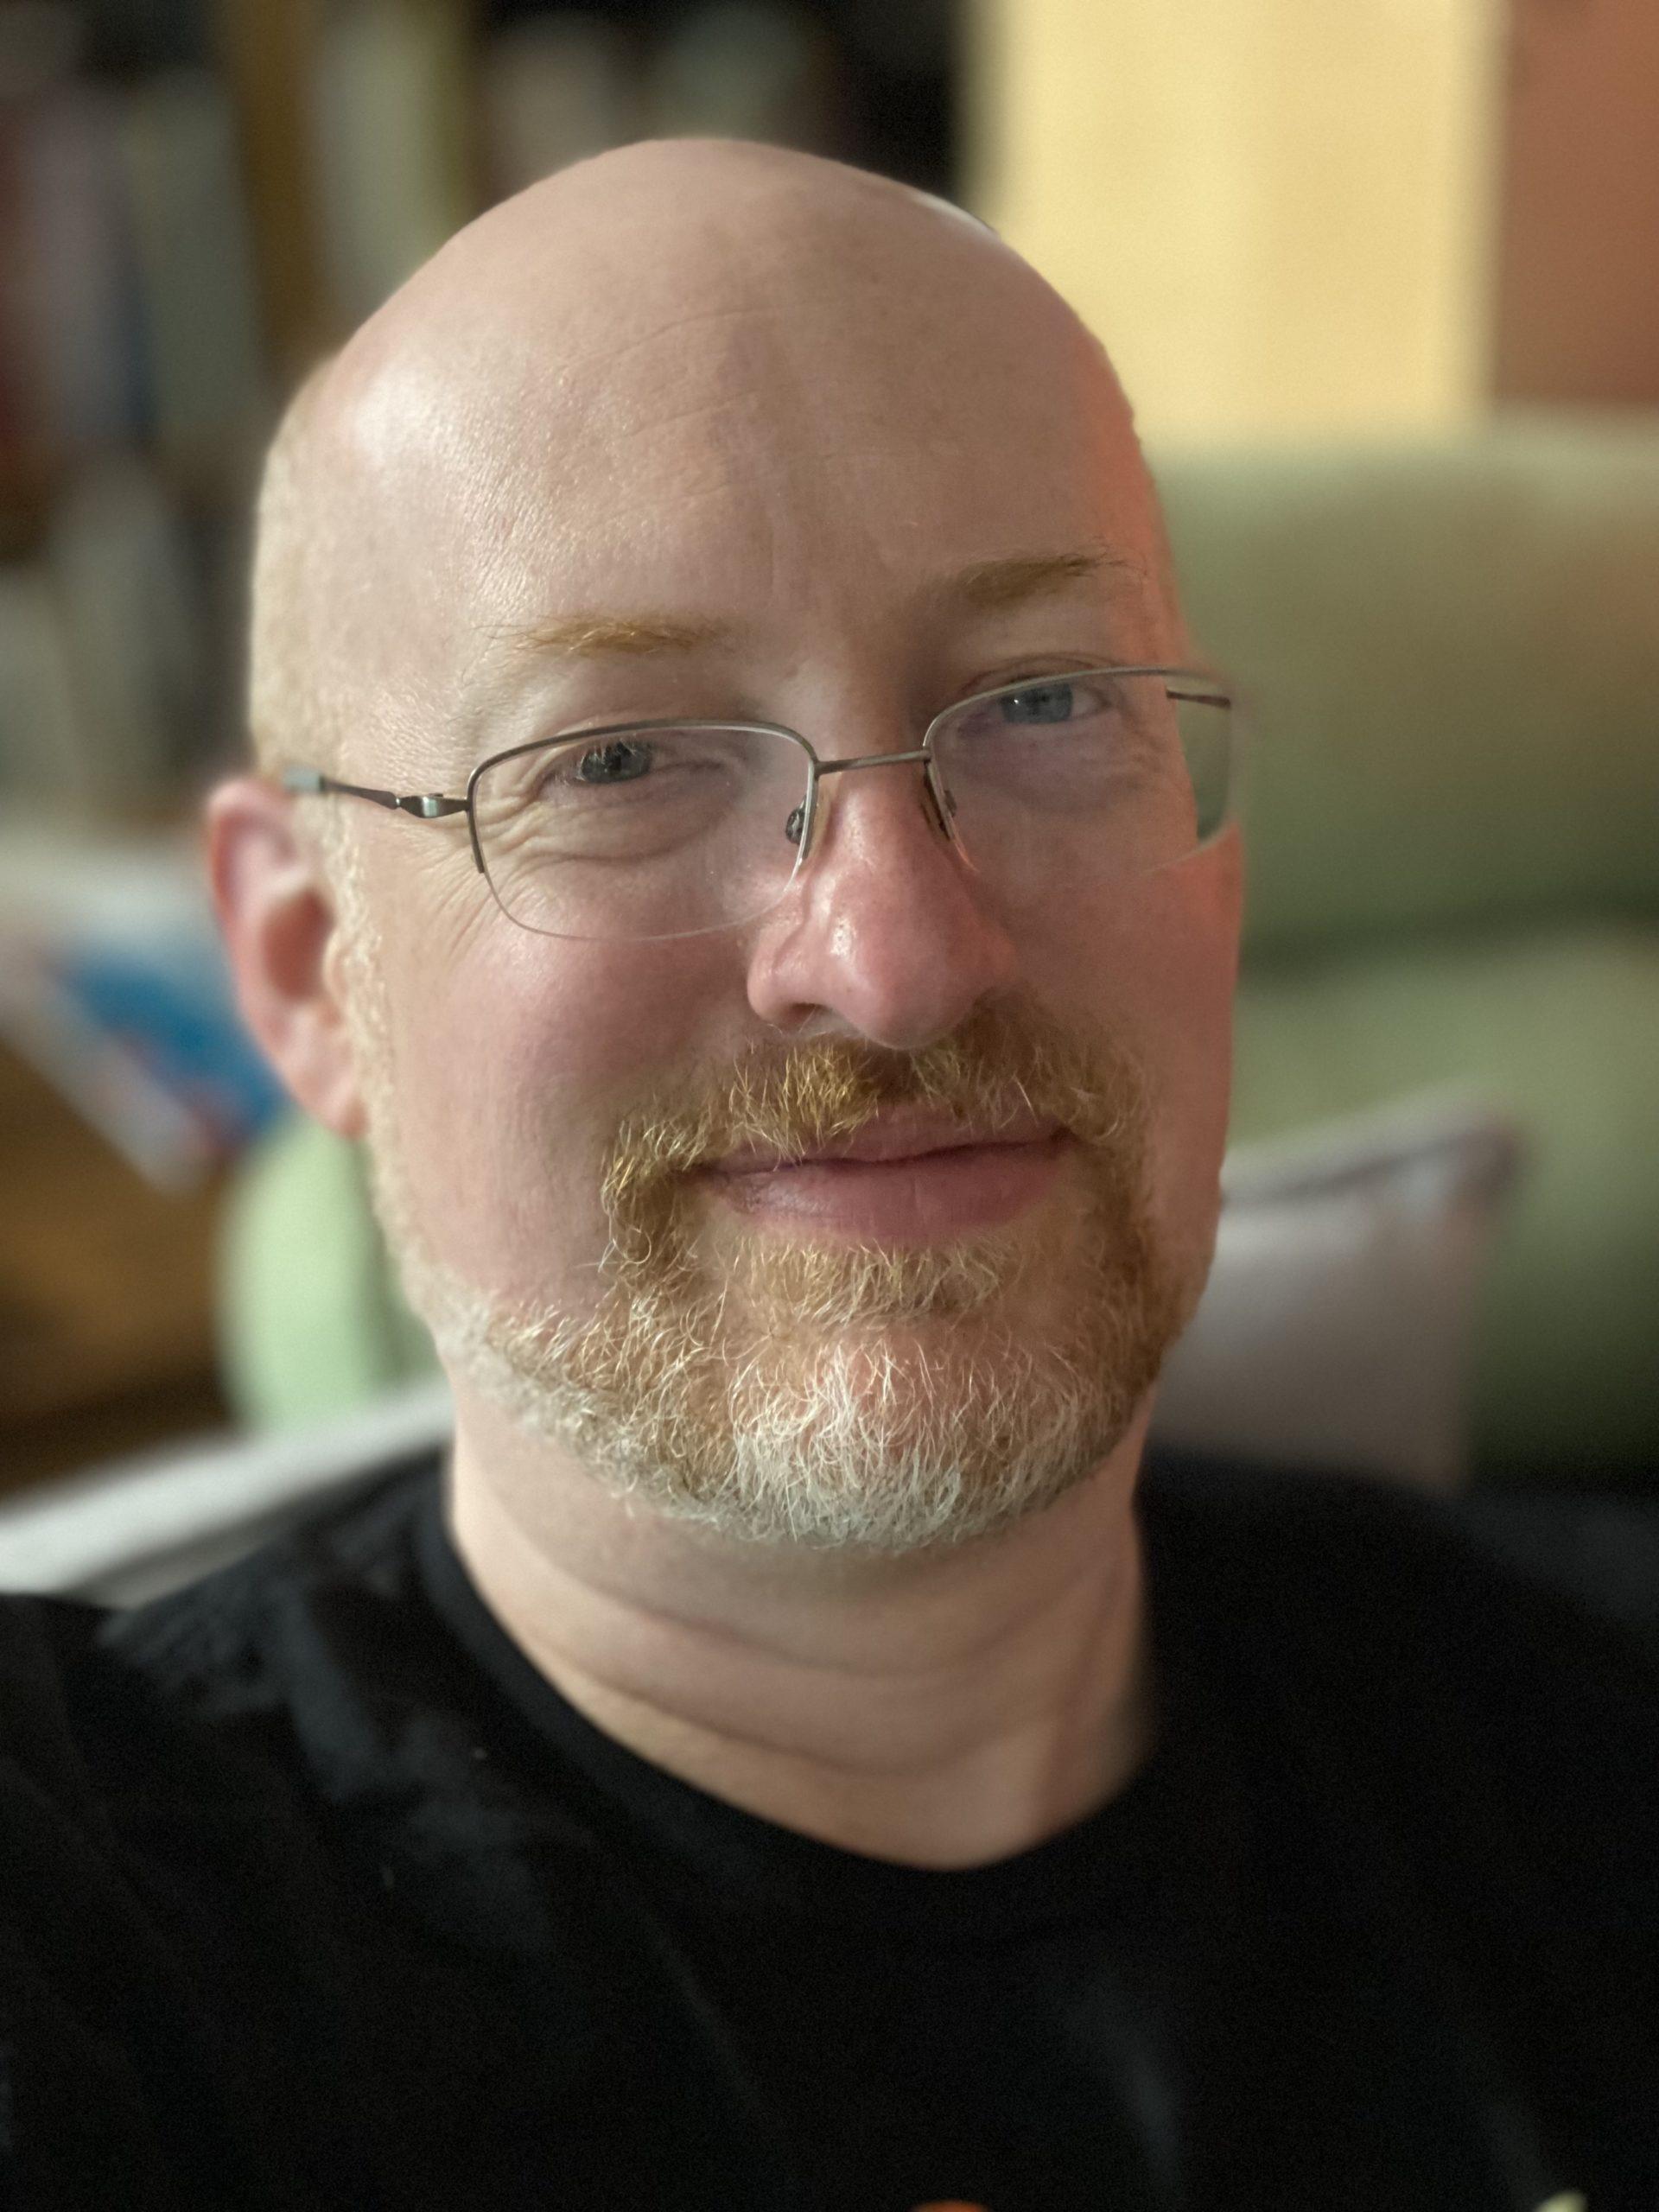 Me, a white, bald man with light red mustache and beard with a lot of white in it around the chin, wearing sillver half-rim wireframe glasses, smiling slightly at the camera.